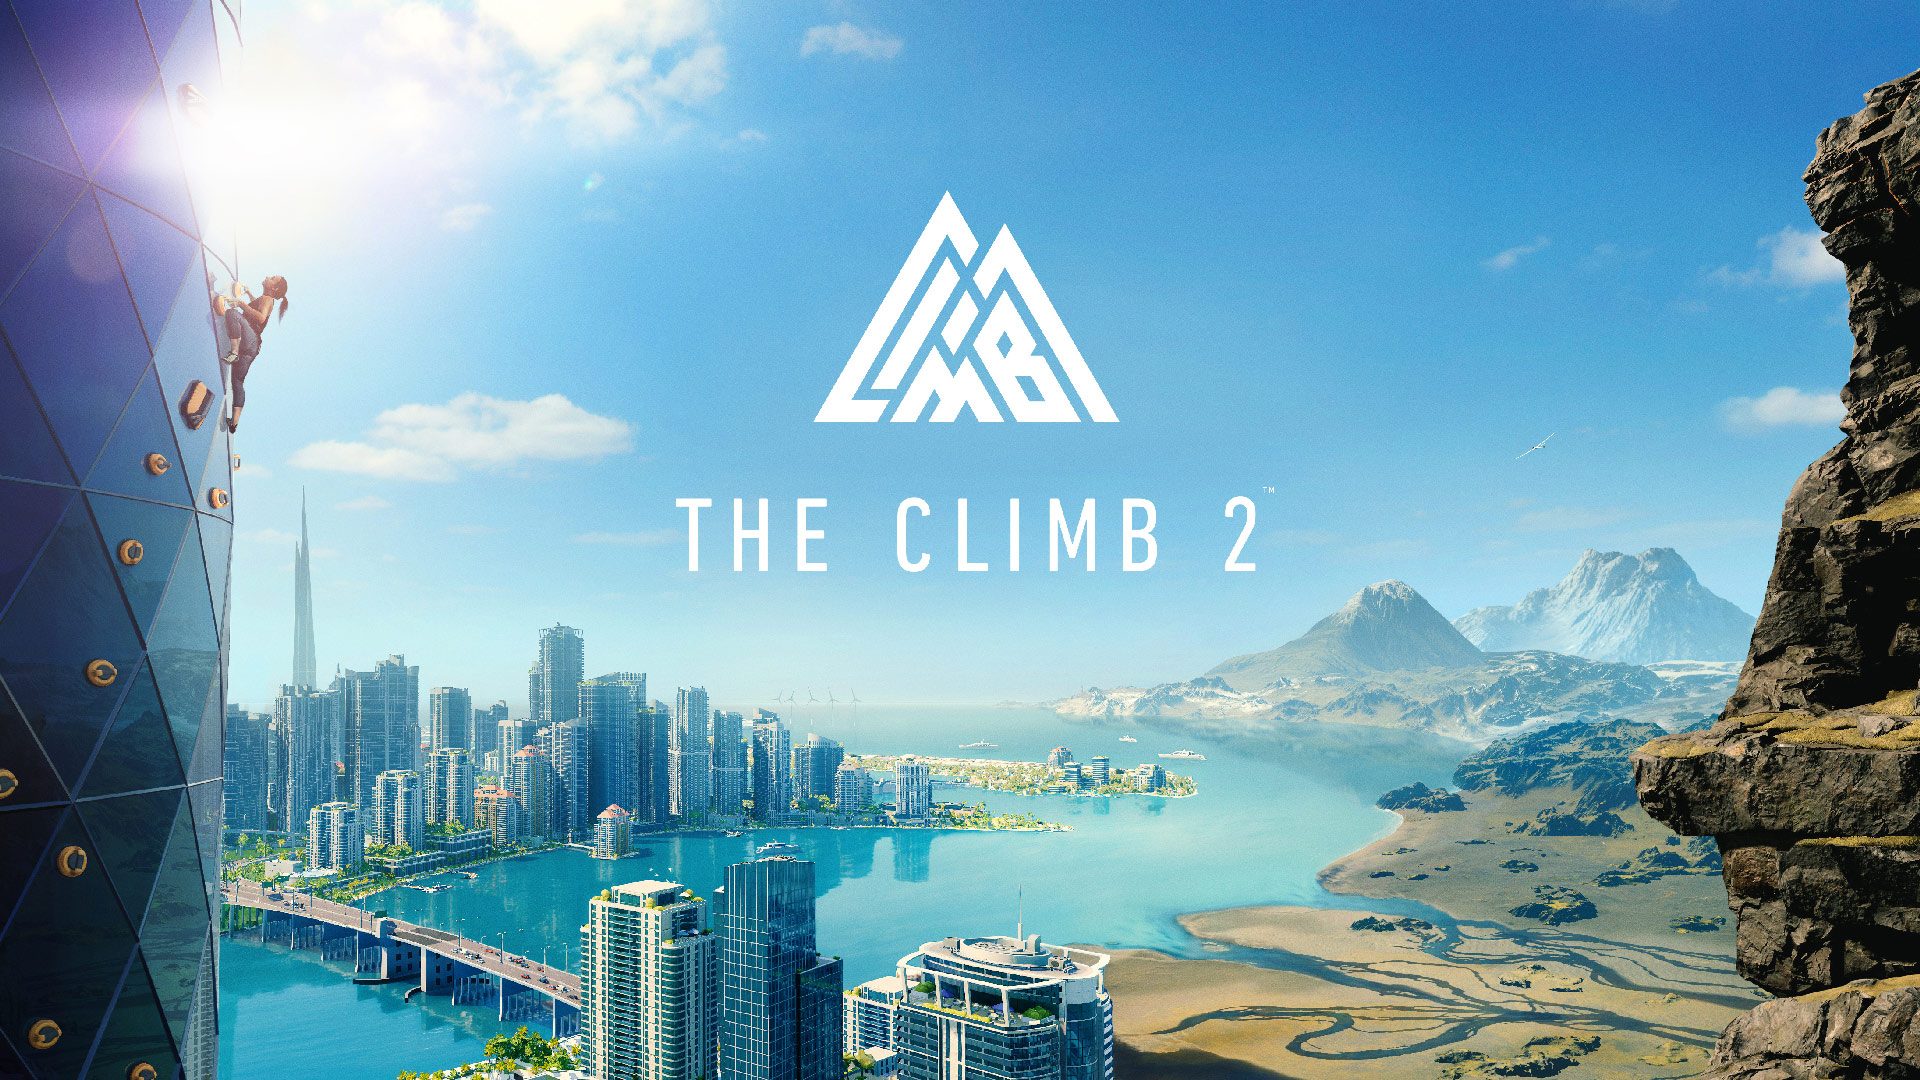 The Climb 2 Release Date Set for March 4th on Oculus Quest